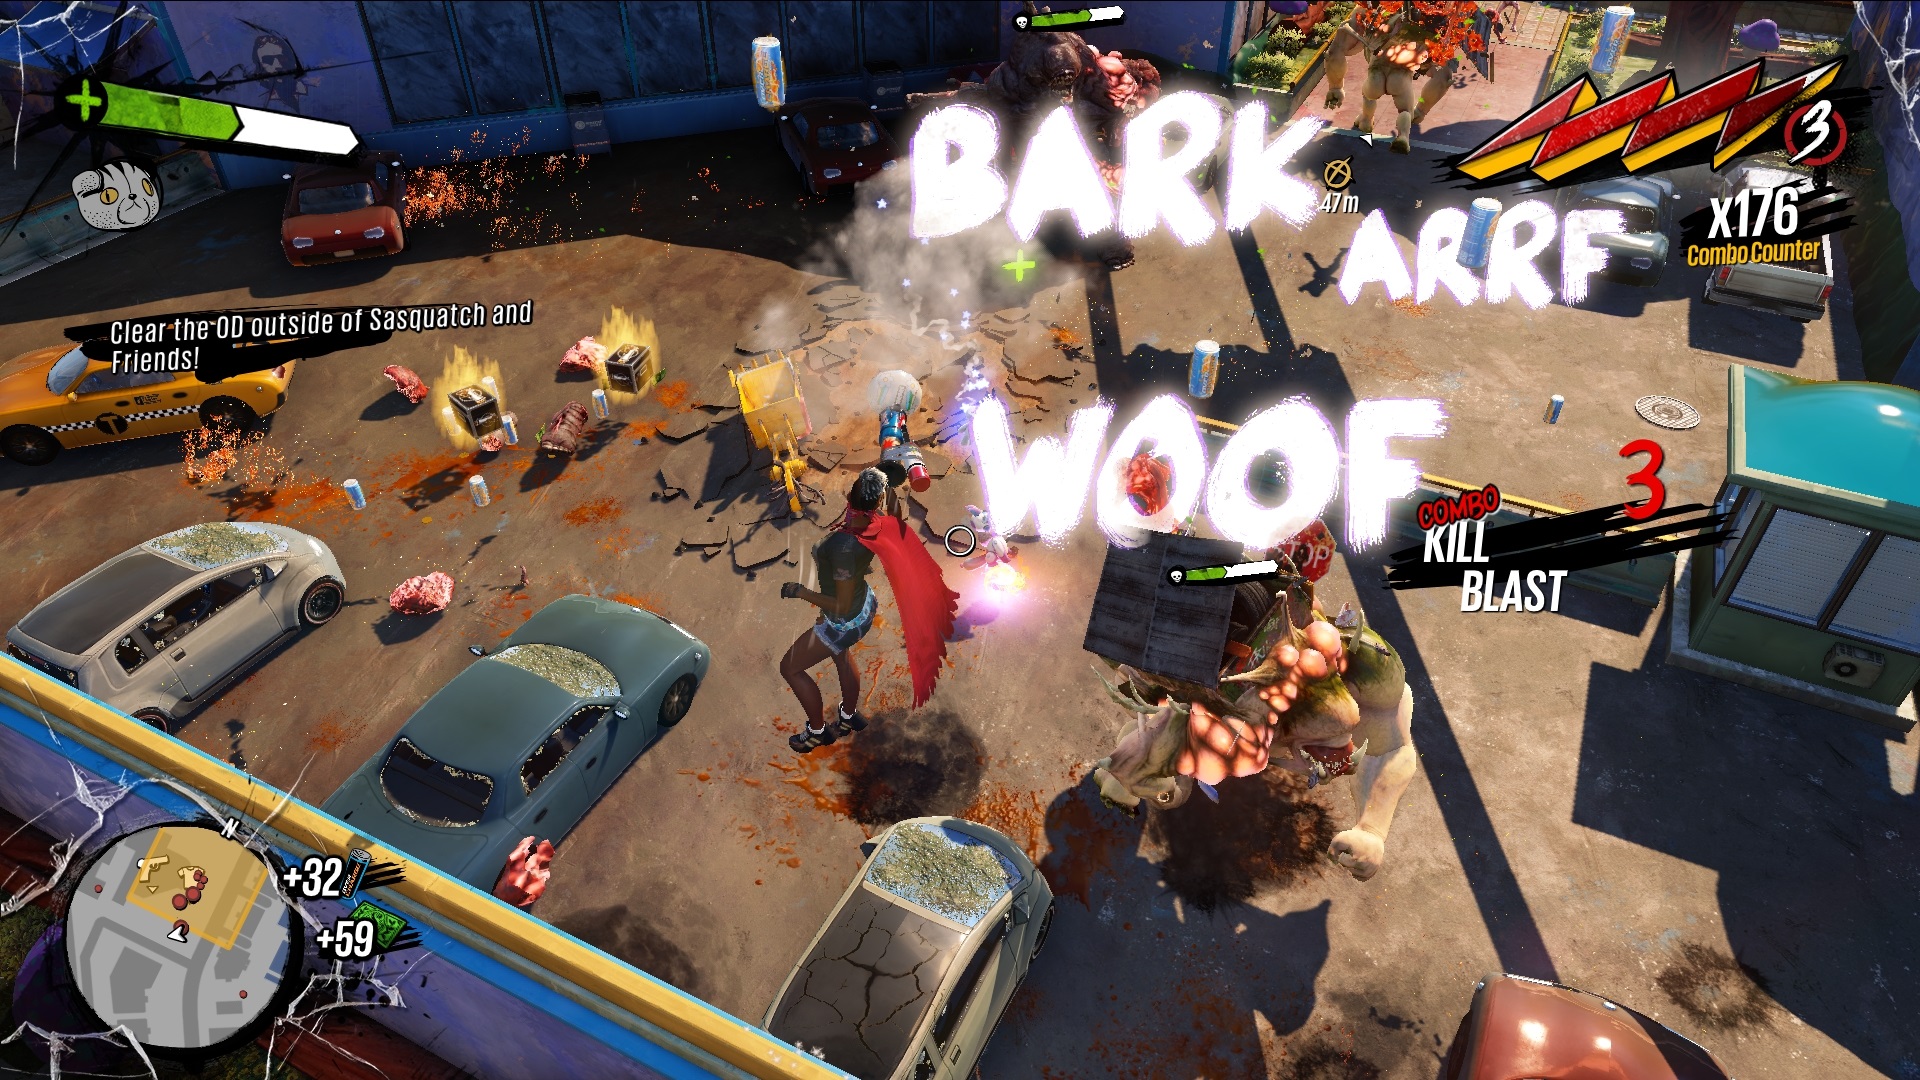 Sunset Overdrive review: Ride the rails to kaboom-town (finally on PCs,  too)